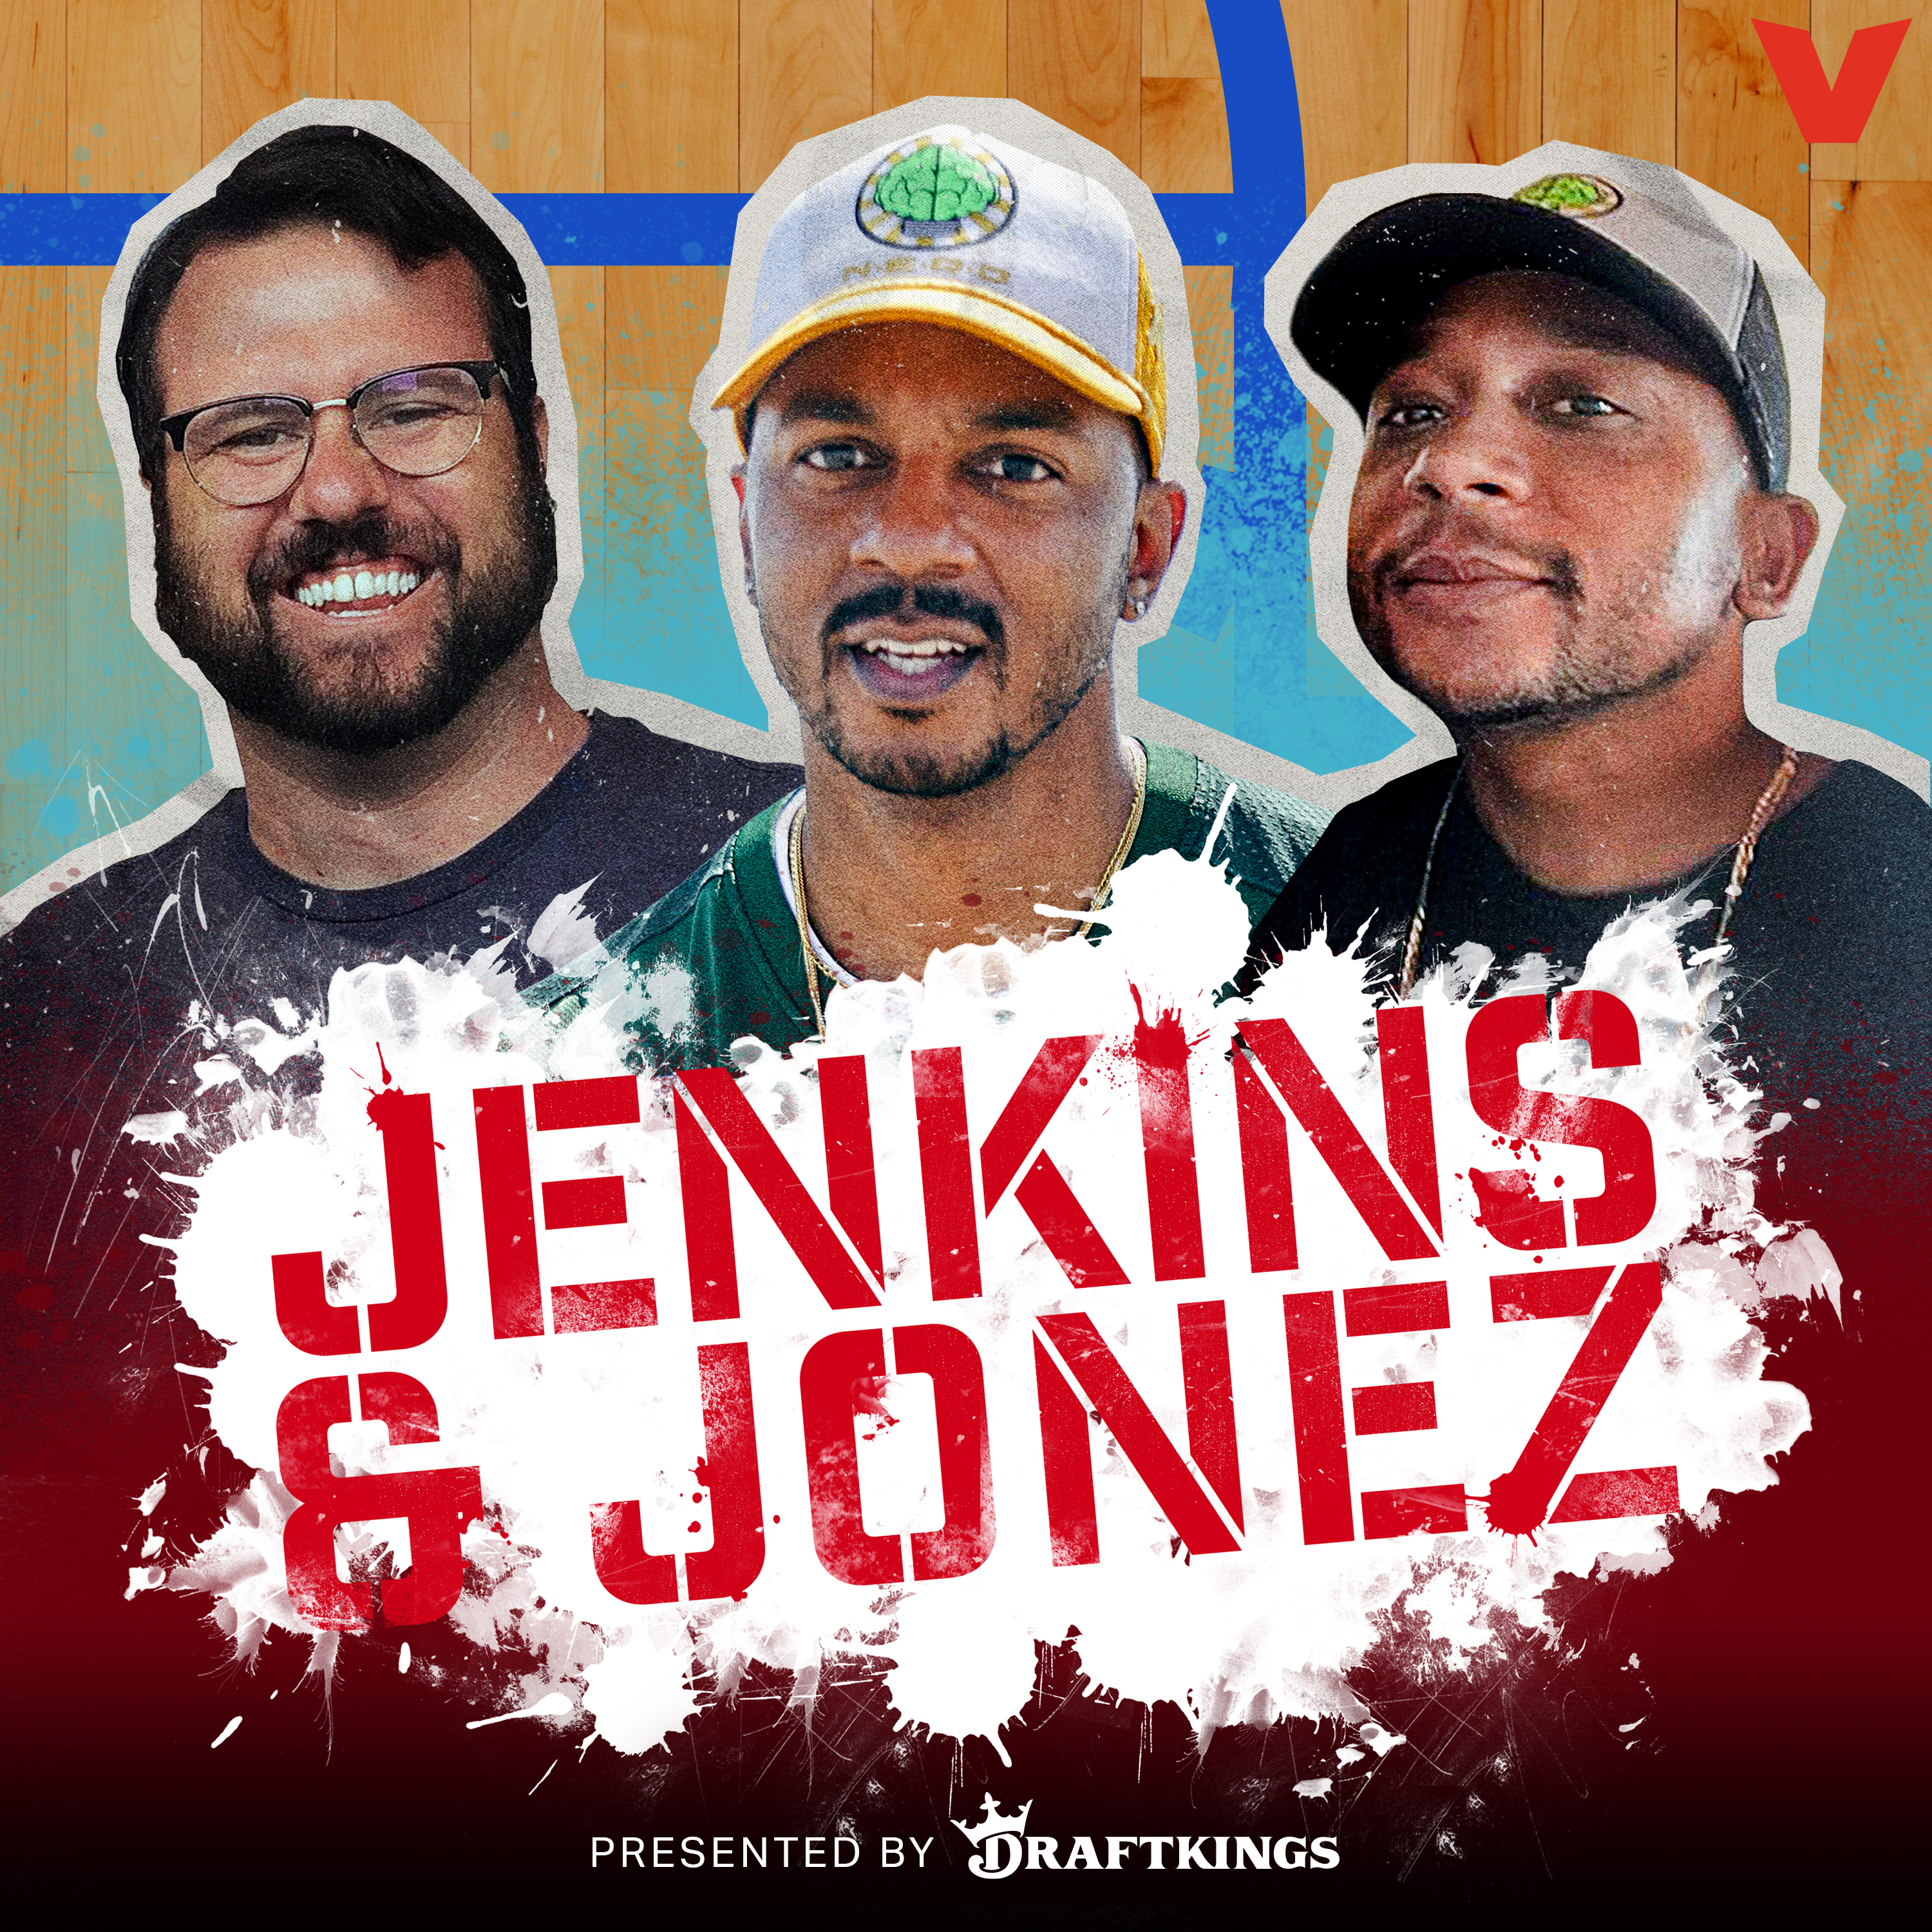 Jenkins and Jonez -  The NFL Playoffs are here